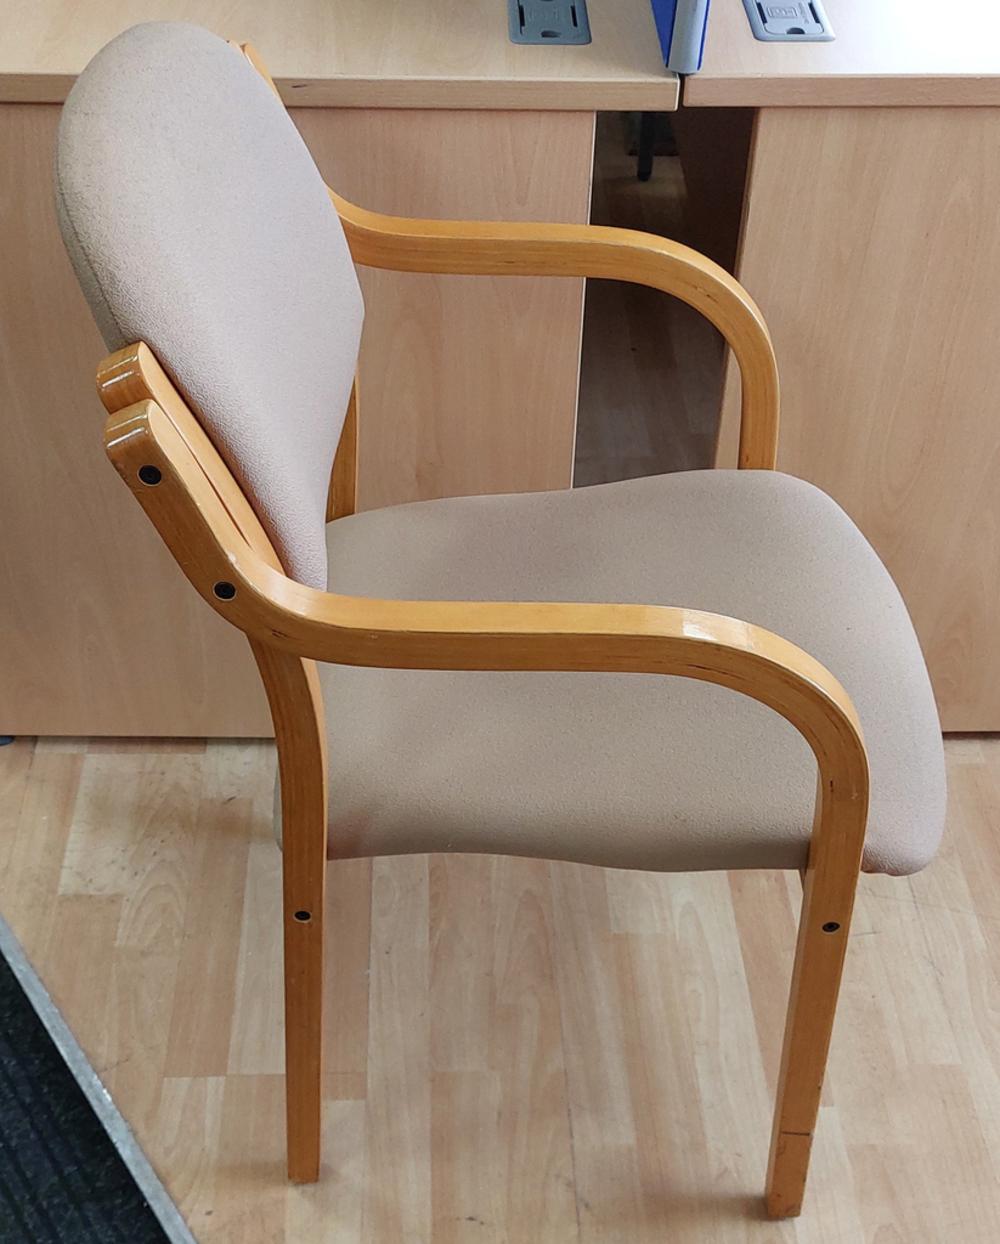 Sandvale Stacking Arm Chair with Wooden Frame